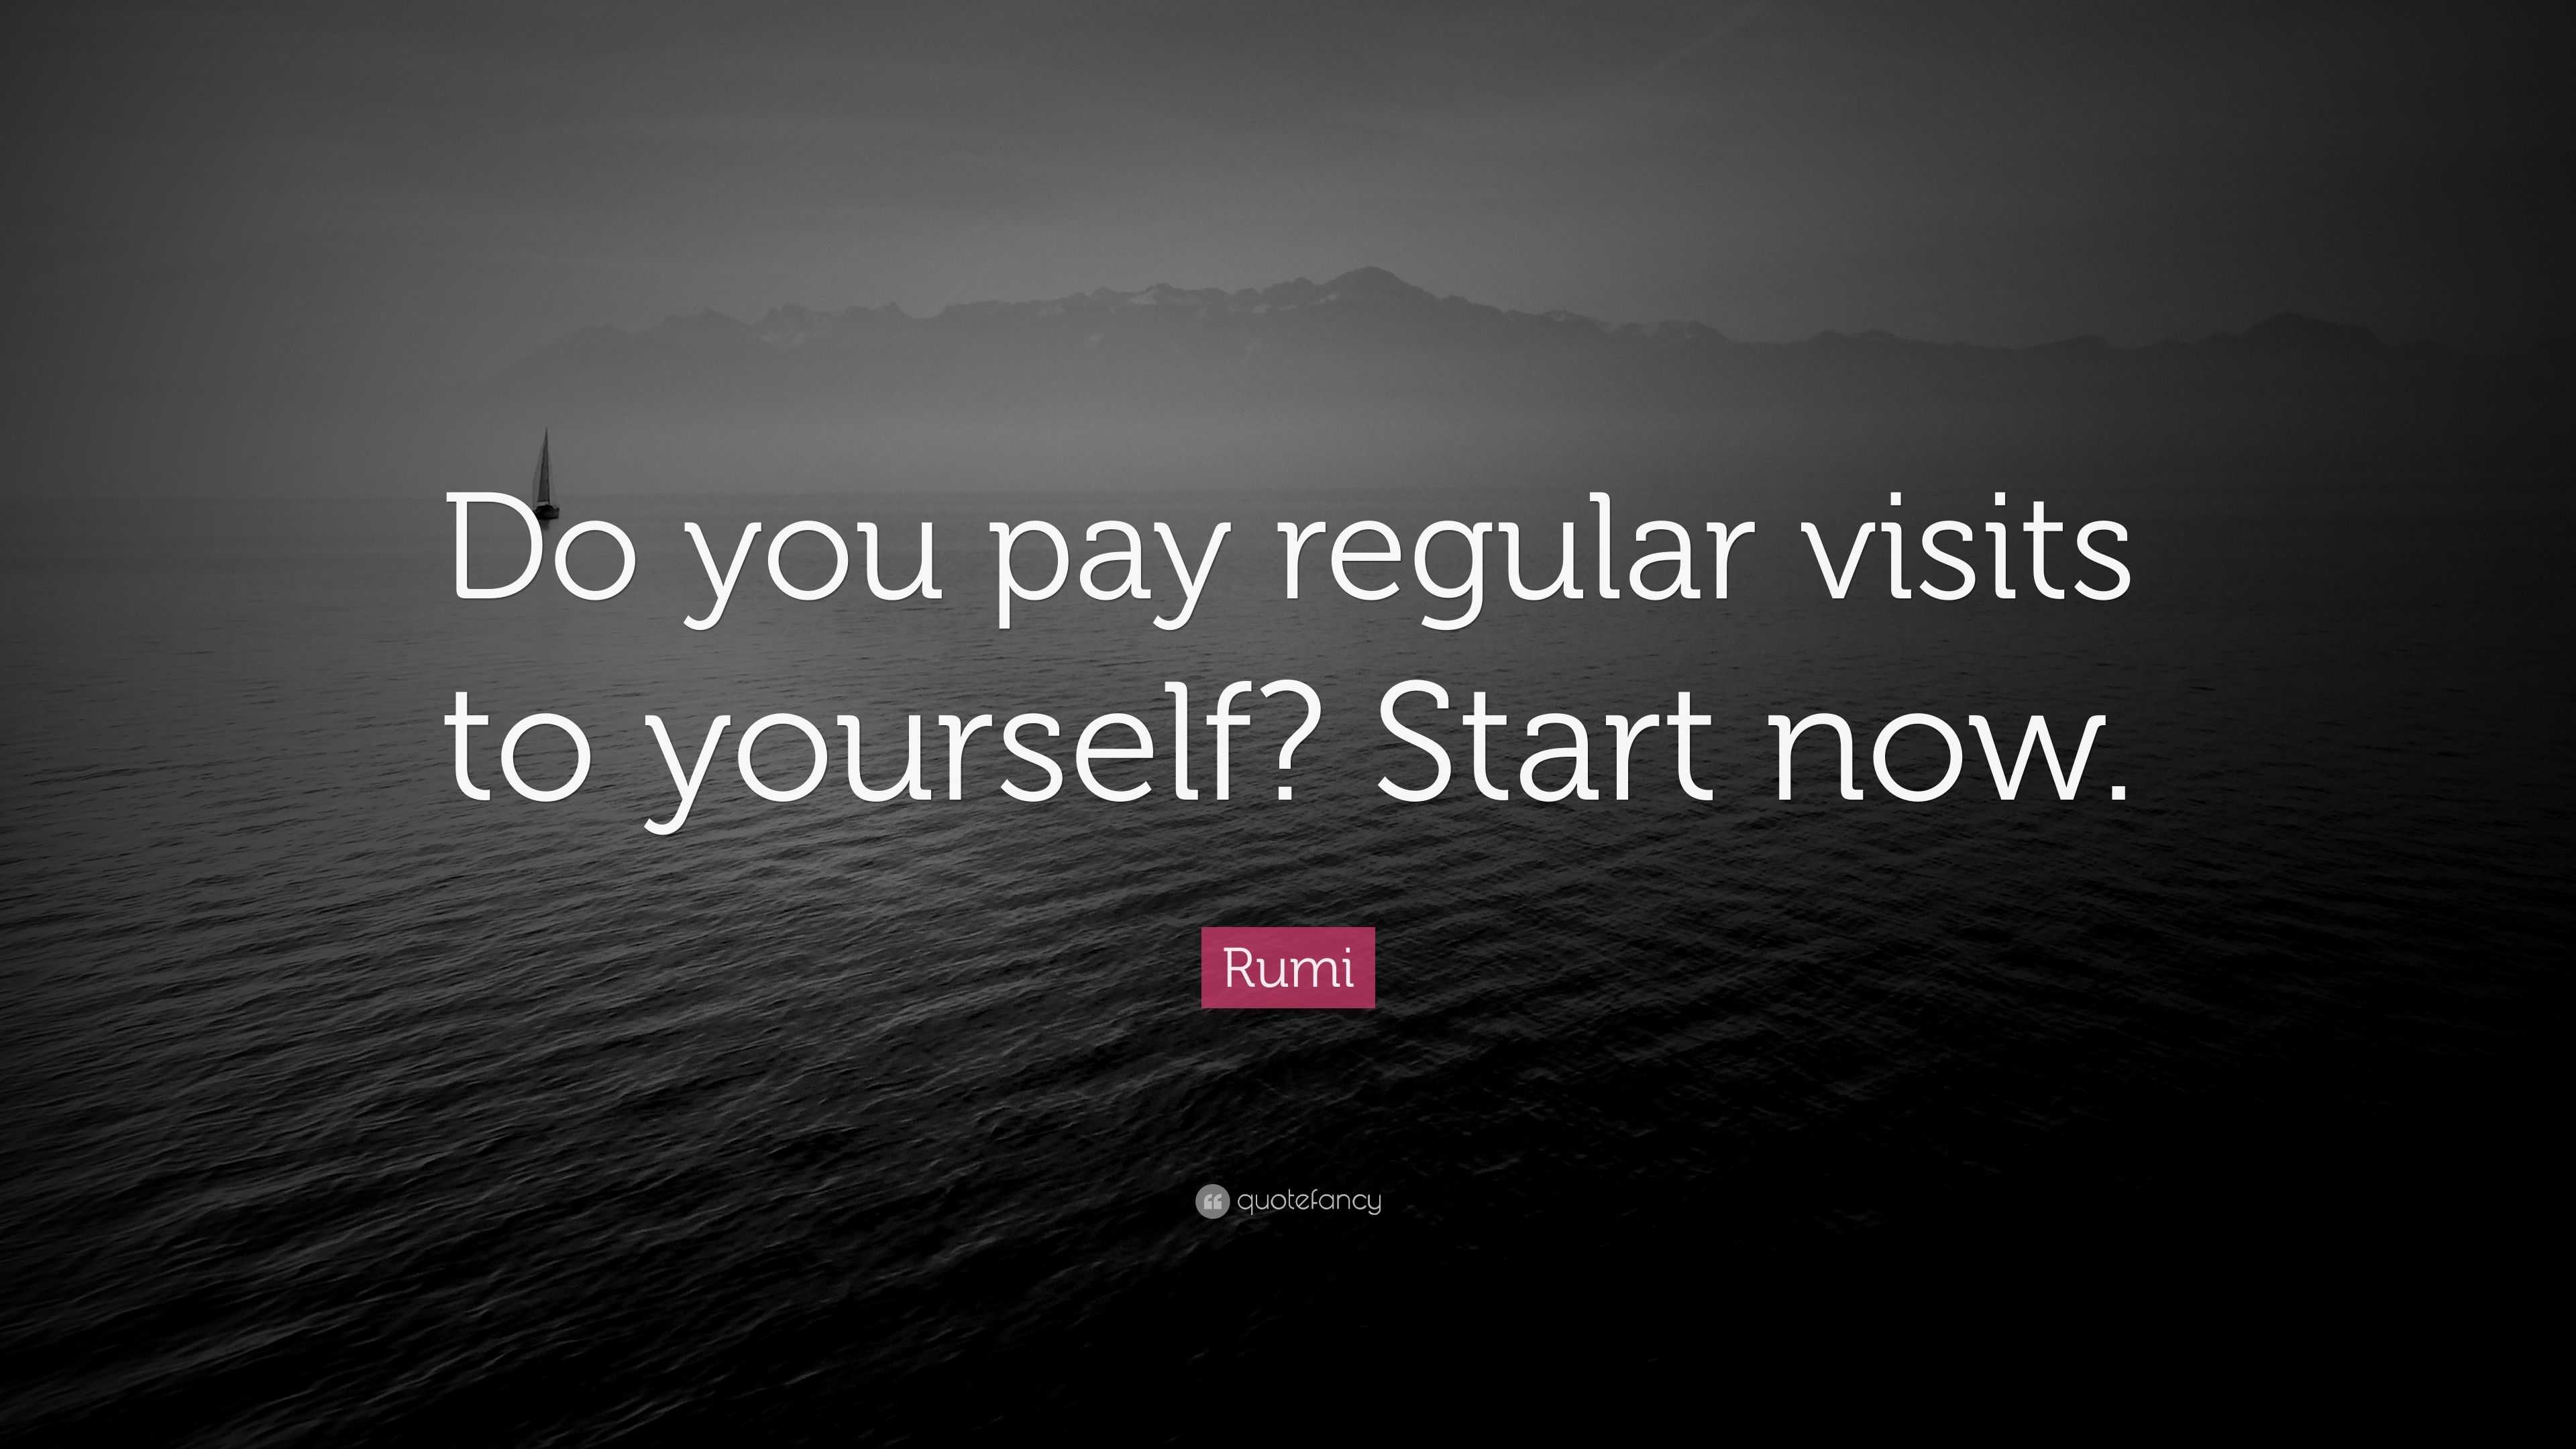 Rumi Quote “Do you pay regular visits to yourself? Start now.”